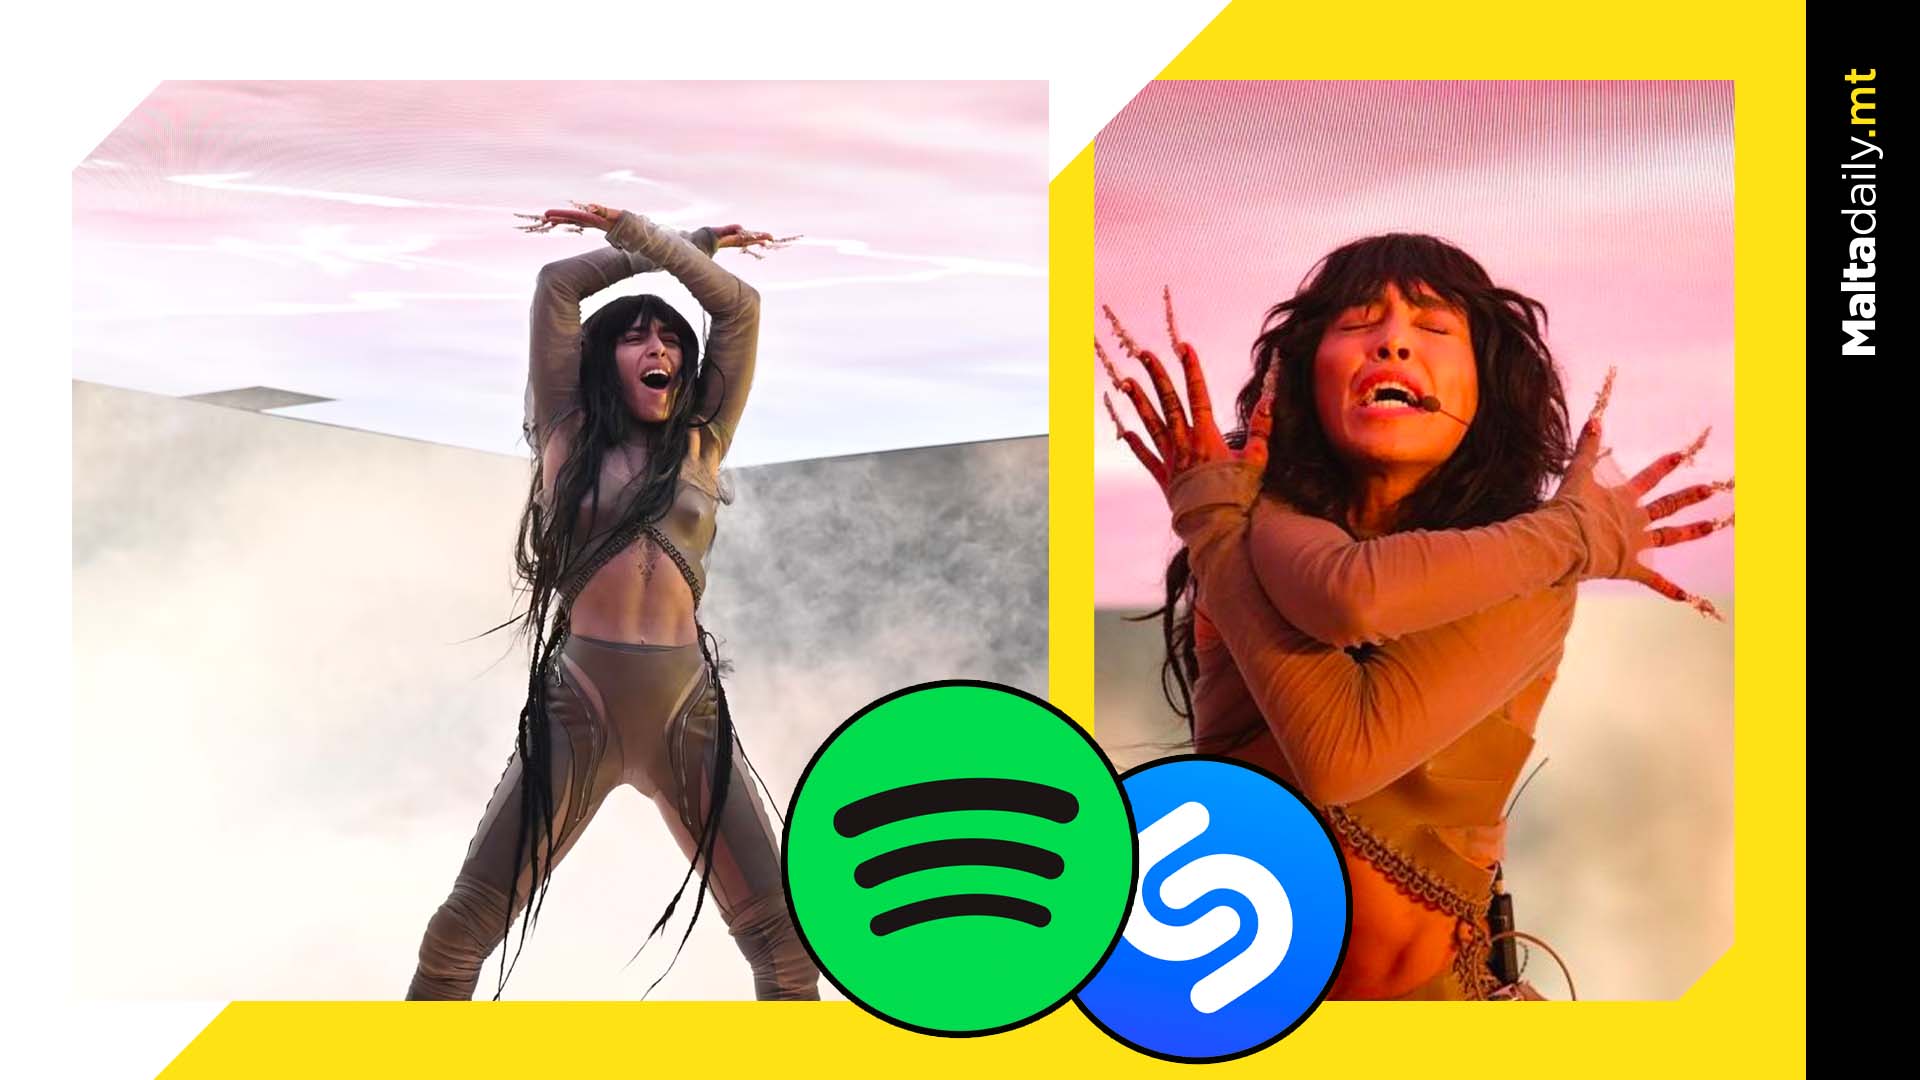 Sweden's Loreen re-enters global Spotify charts at #103